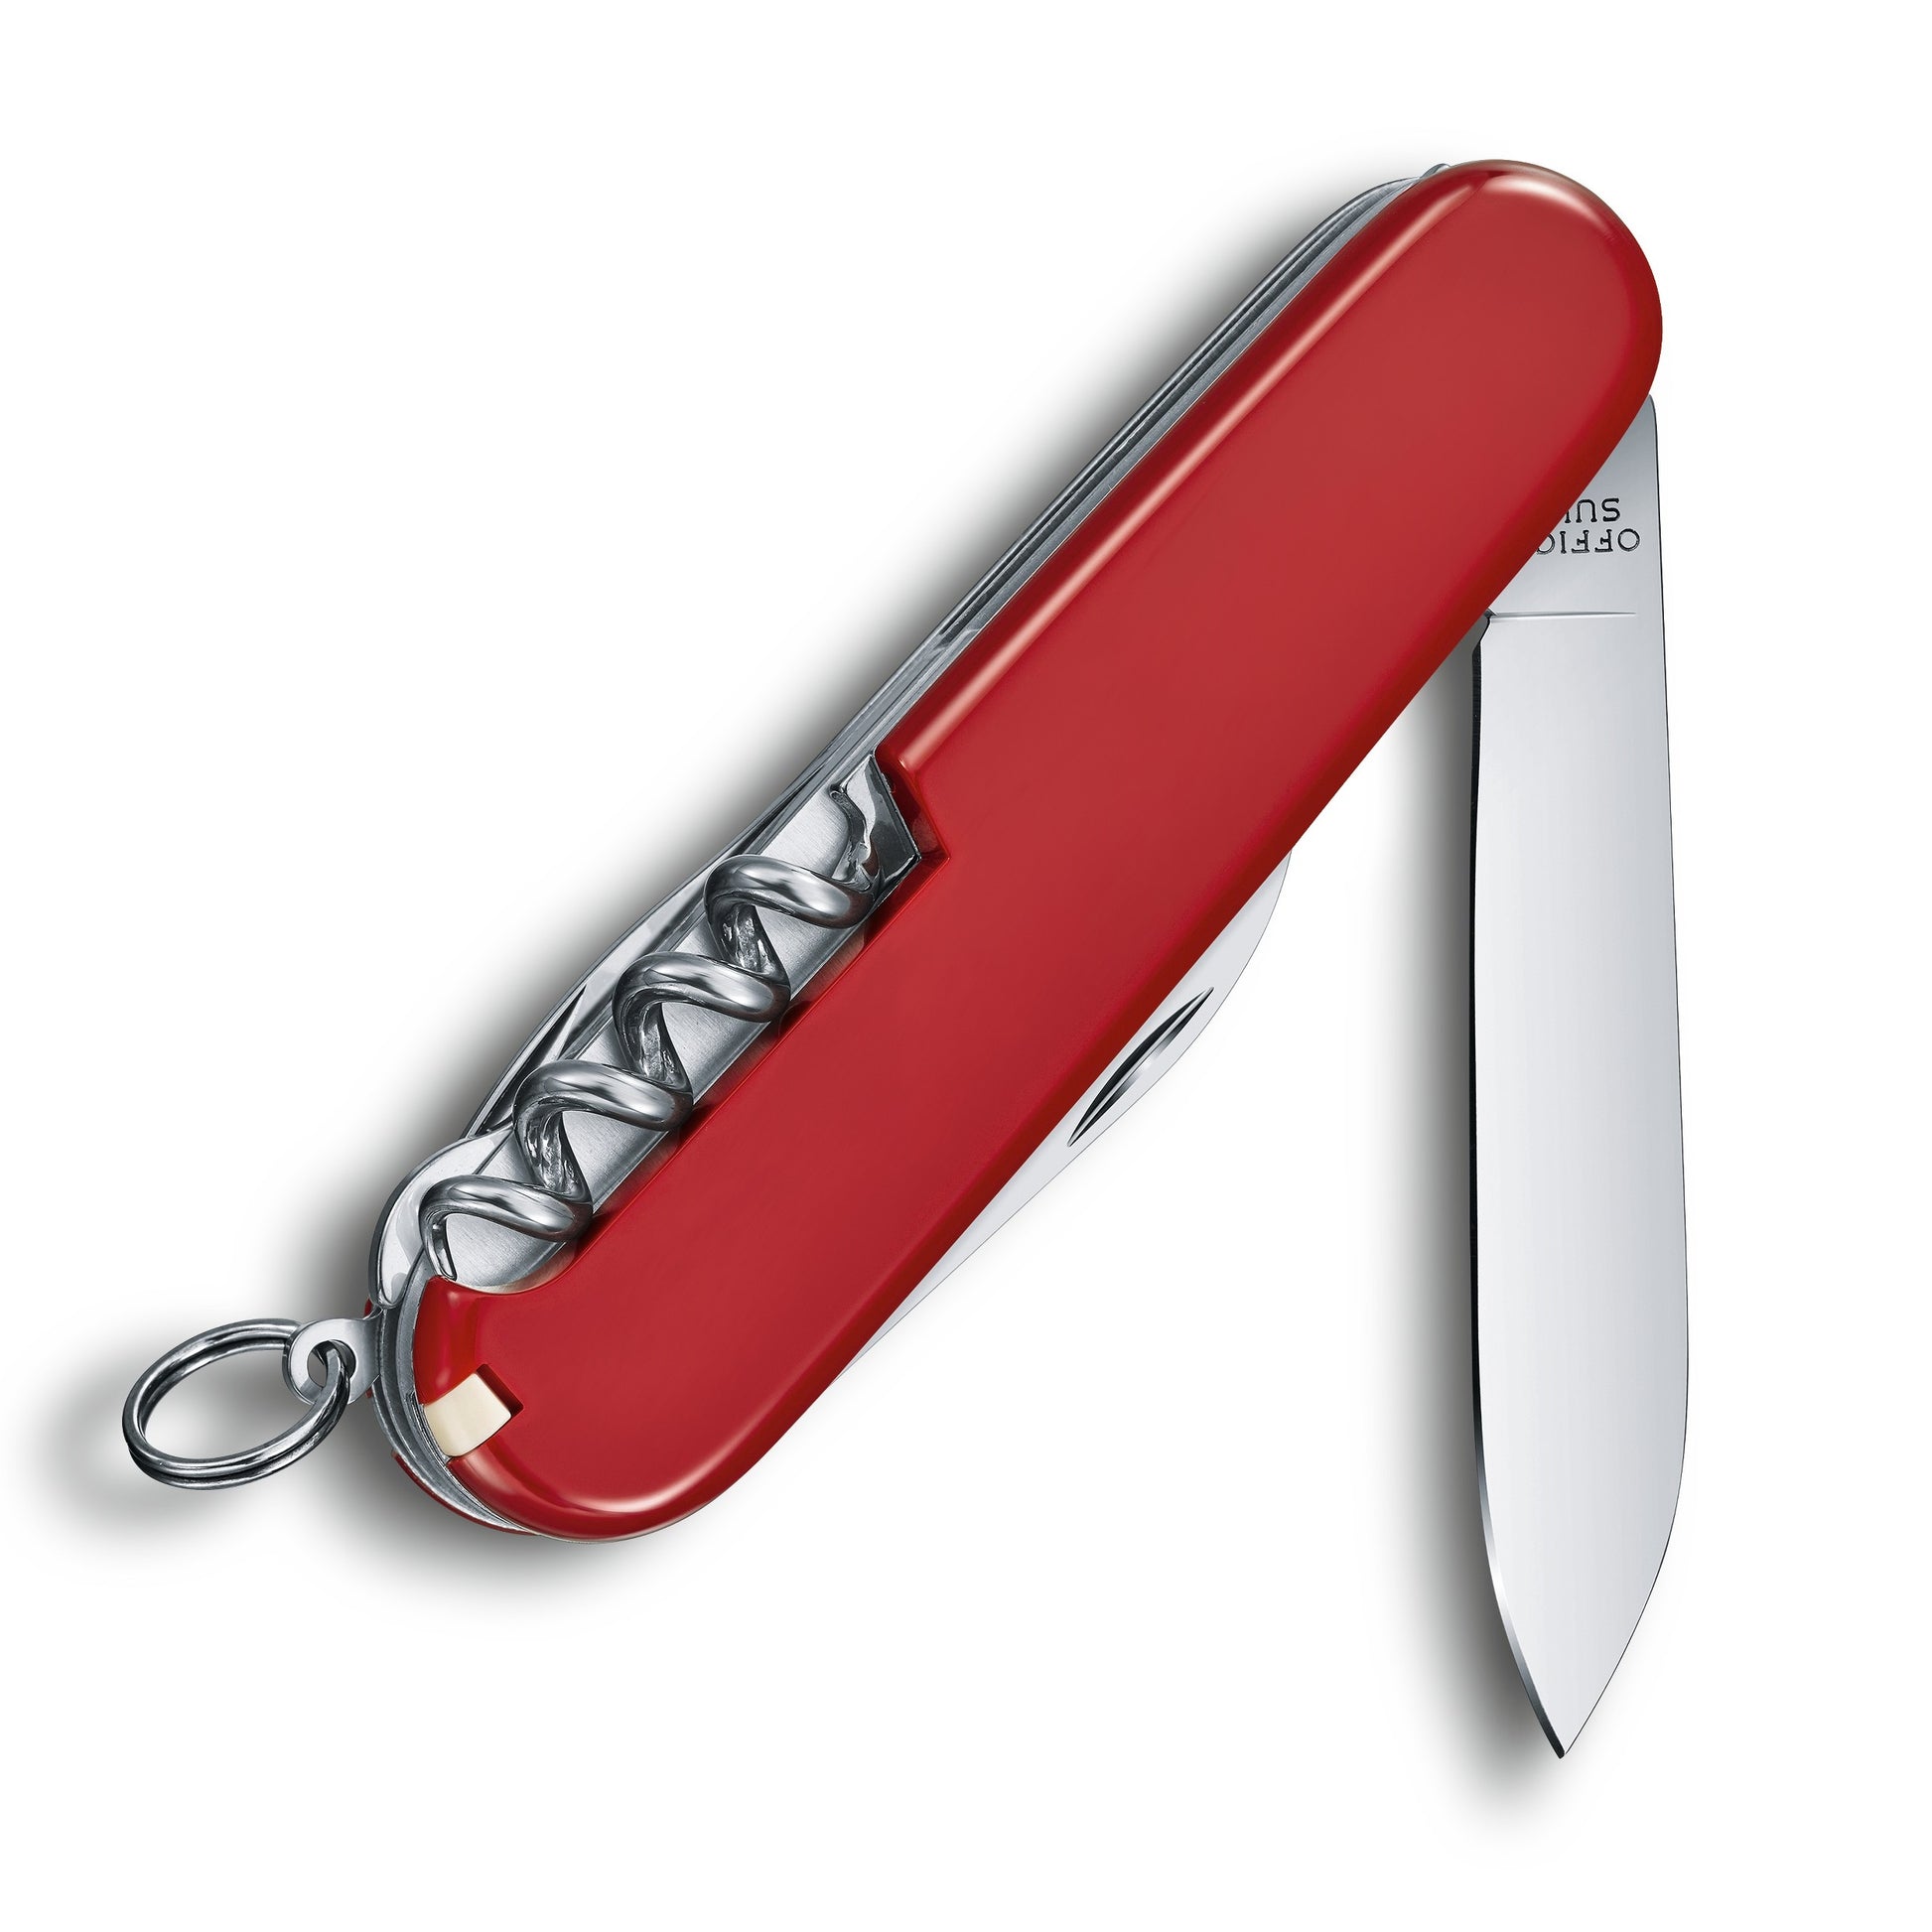  Victorinox Spartan White - Swiss Army Pocket Knife 91 mm - 12  Tools : Sports & Outdoors